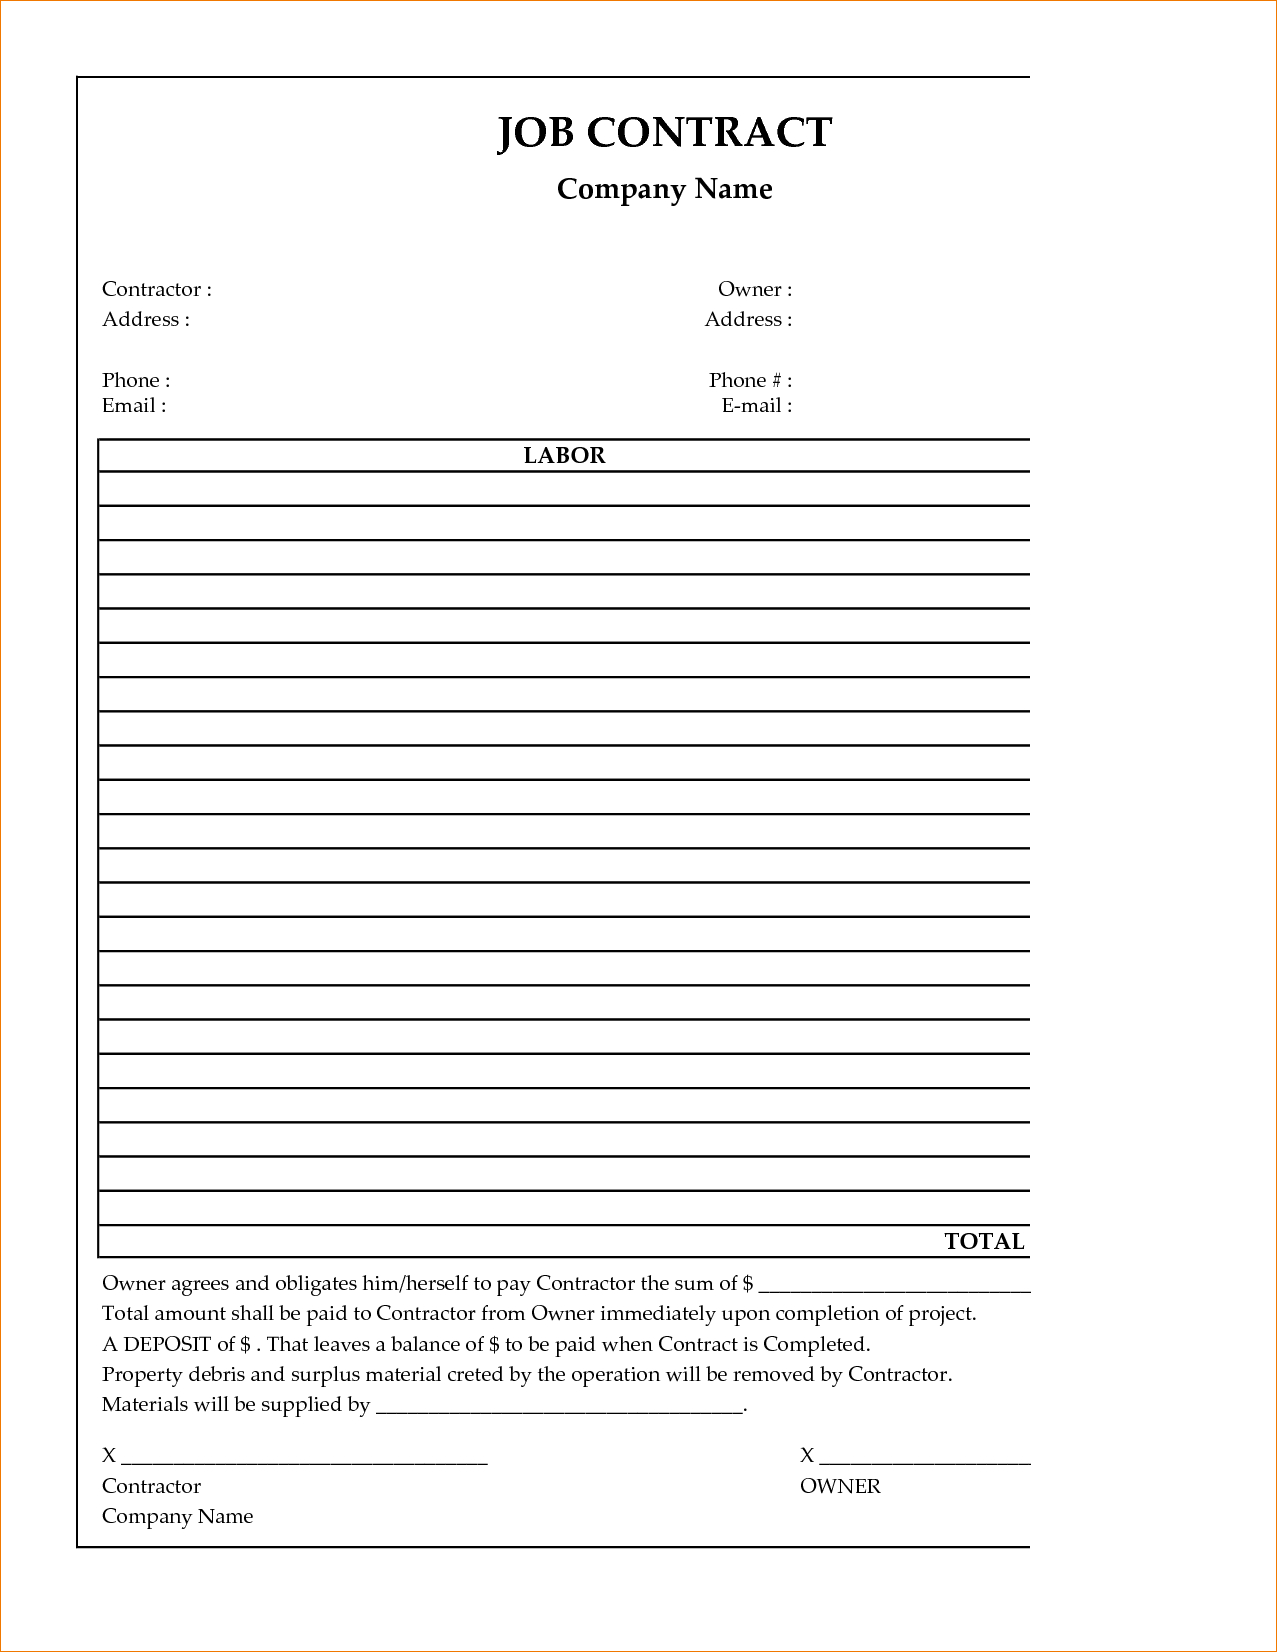 Free Construction Contract Agreement Template 002 Free Construction Contractte Ideas Simple Form Hospiiseworks